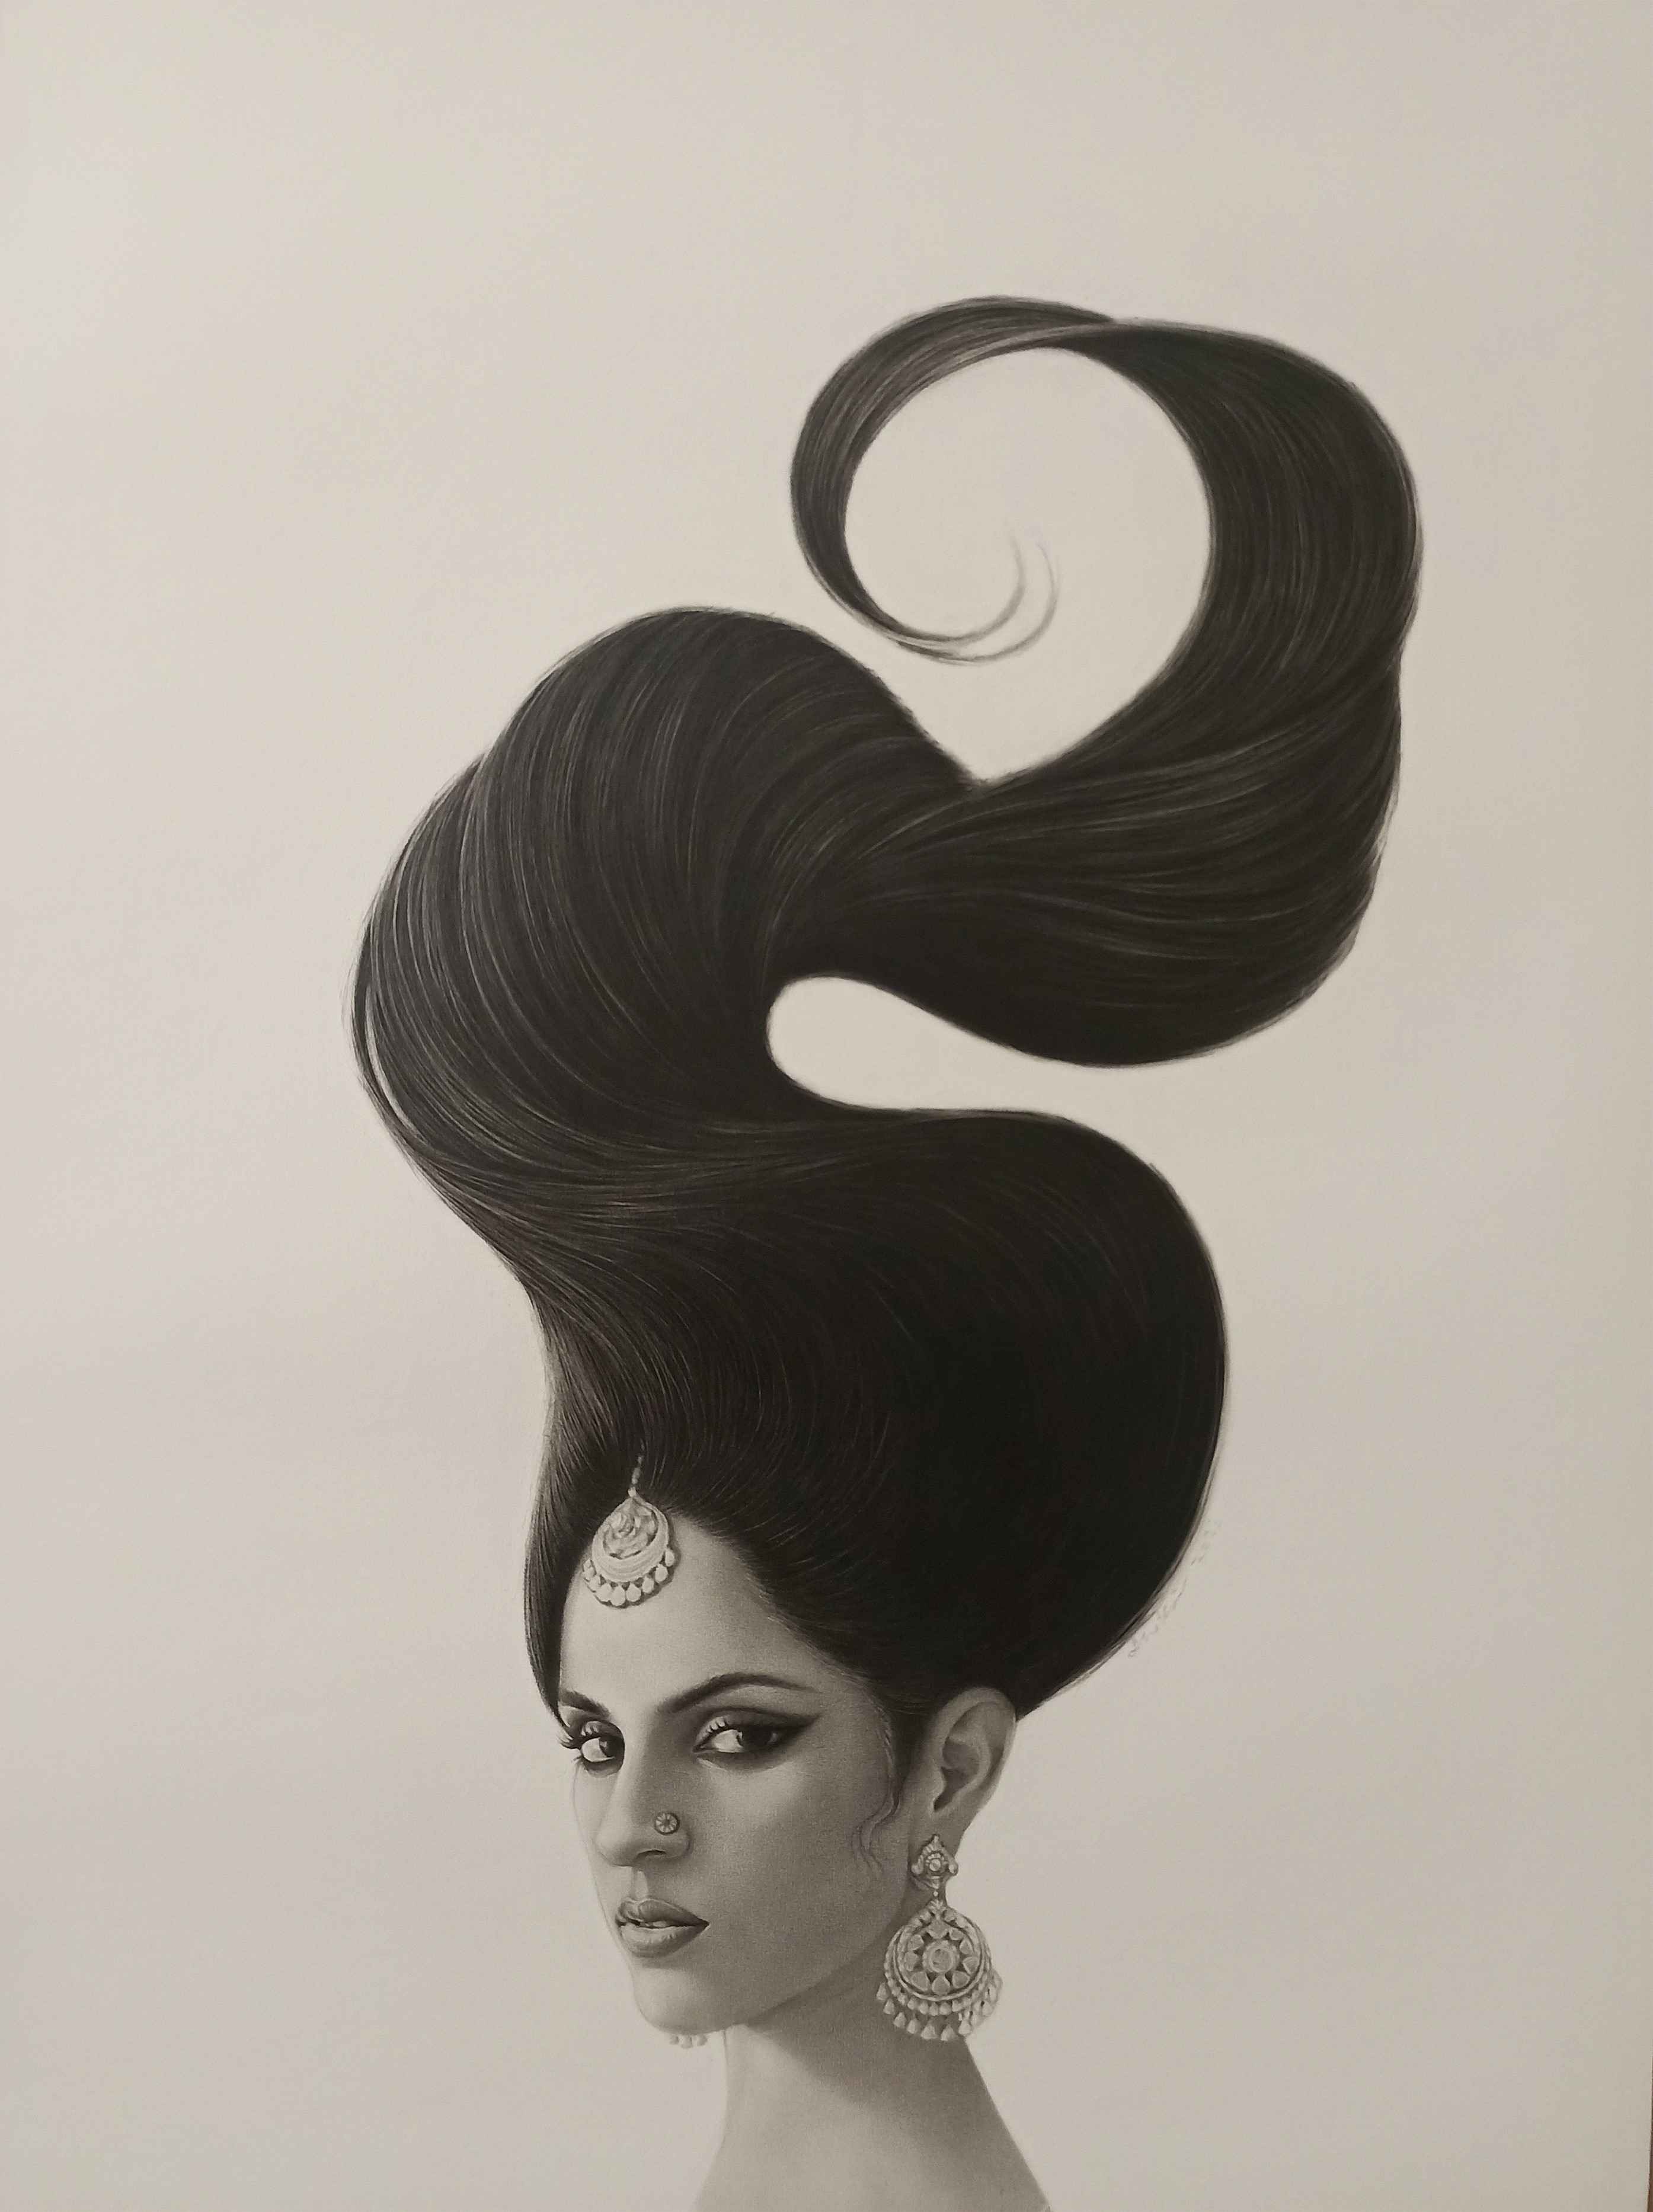 Artist: Ali Karimi<br> Title: UNTITLED 04<br> Medium: Graphite andCharcoal on paper<br> Size: 43x30 inches